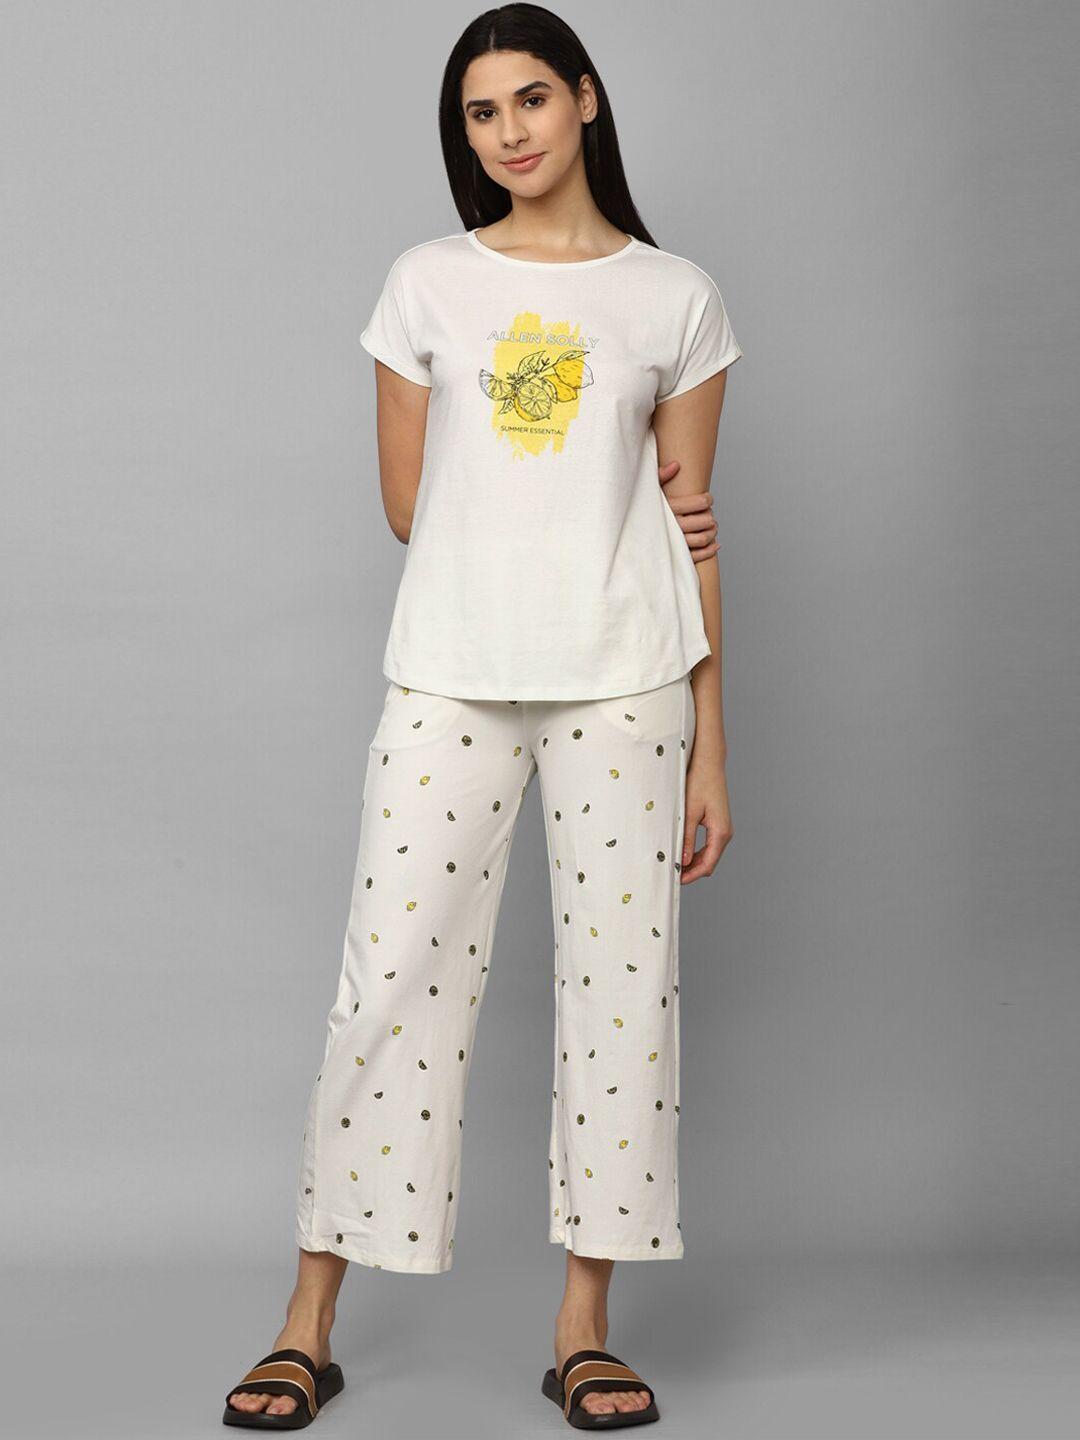 allen-solly-woman-printed-pure-cotton-night-suit